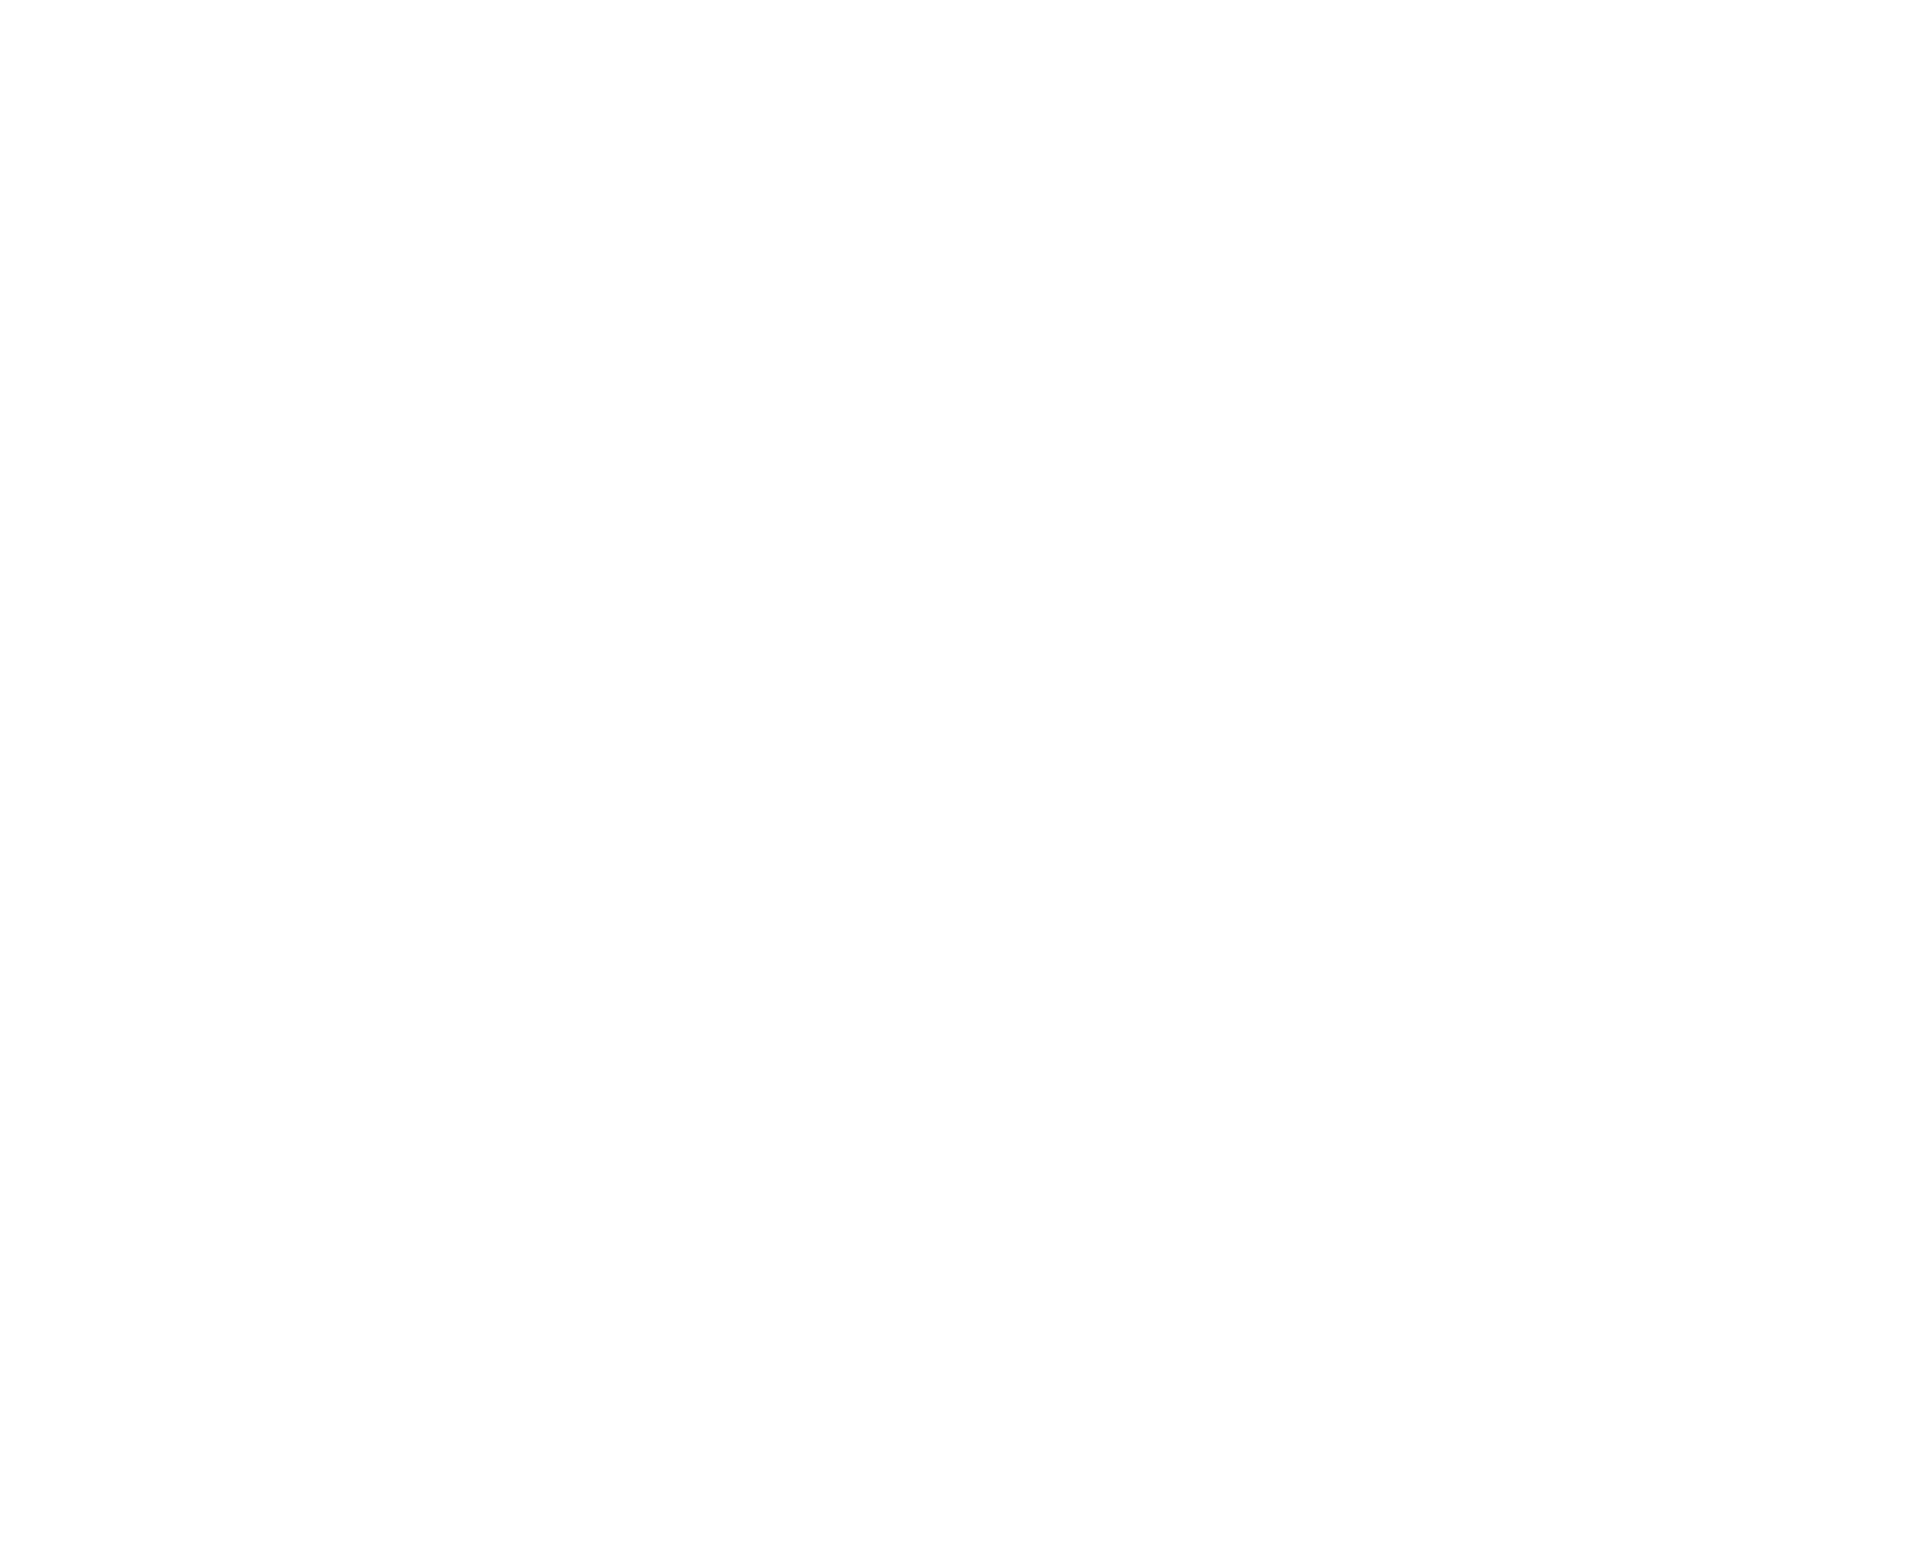 EAST FIT COACHING